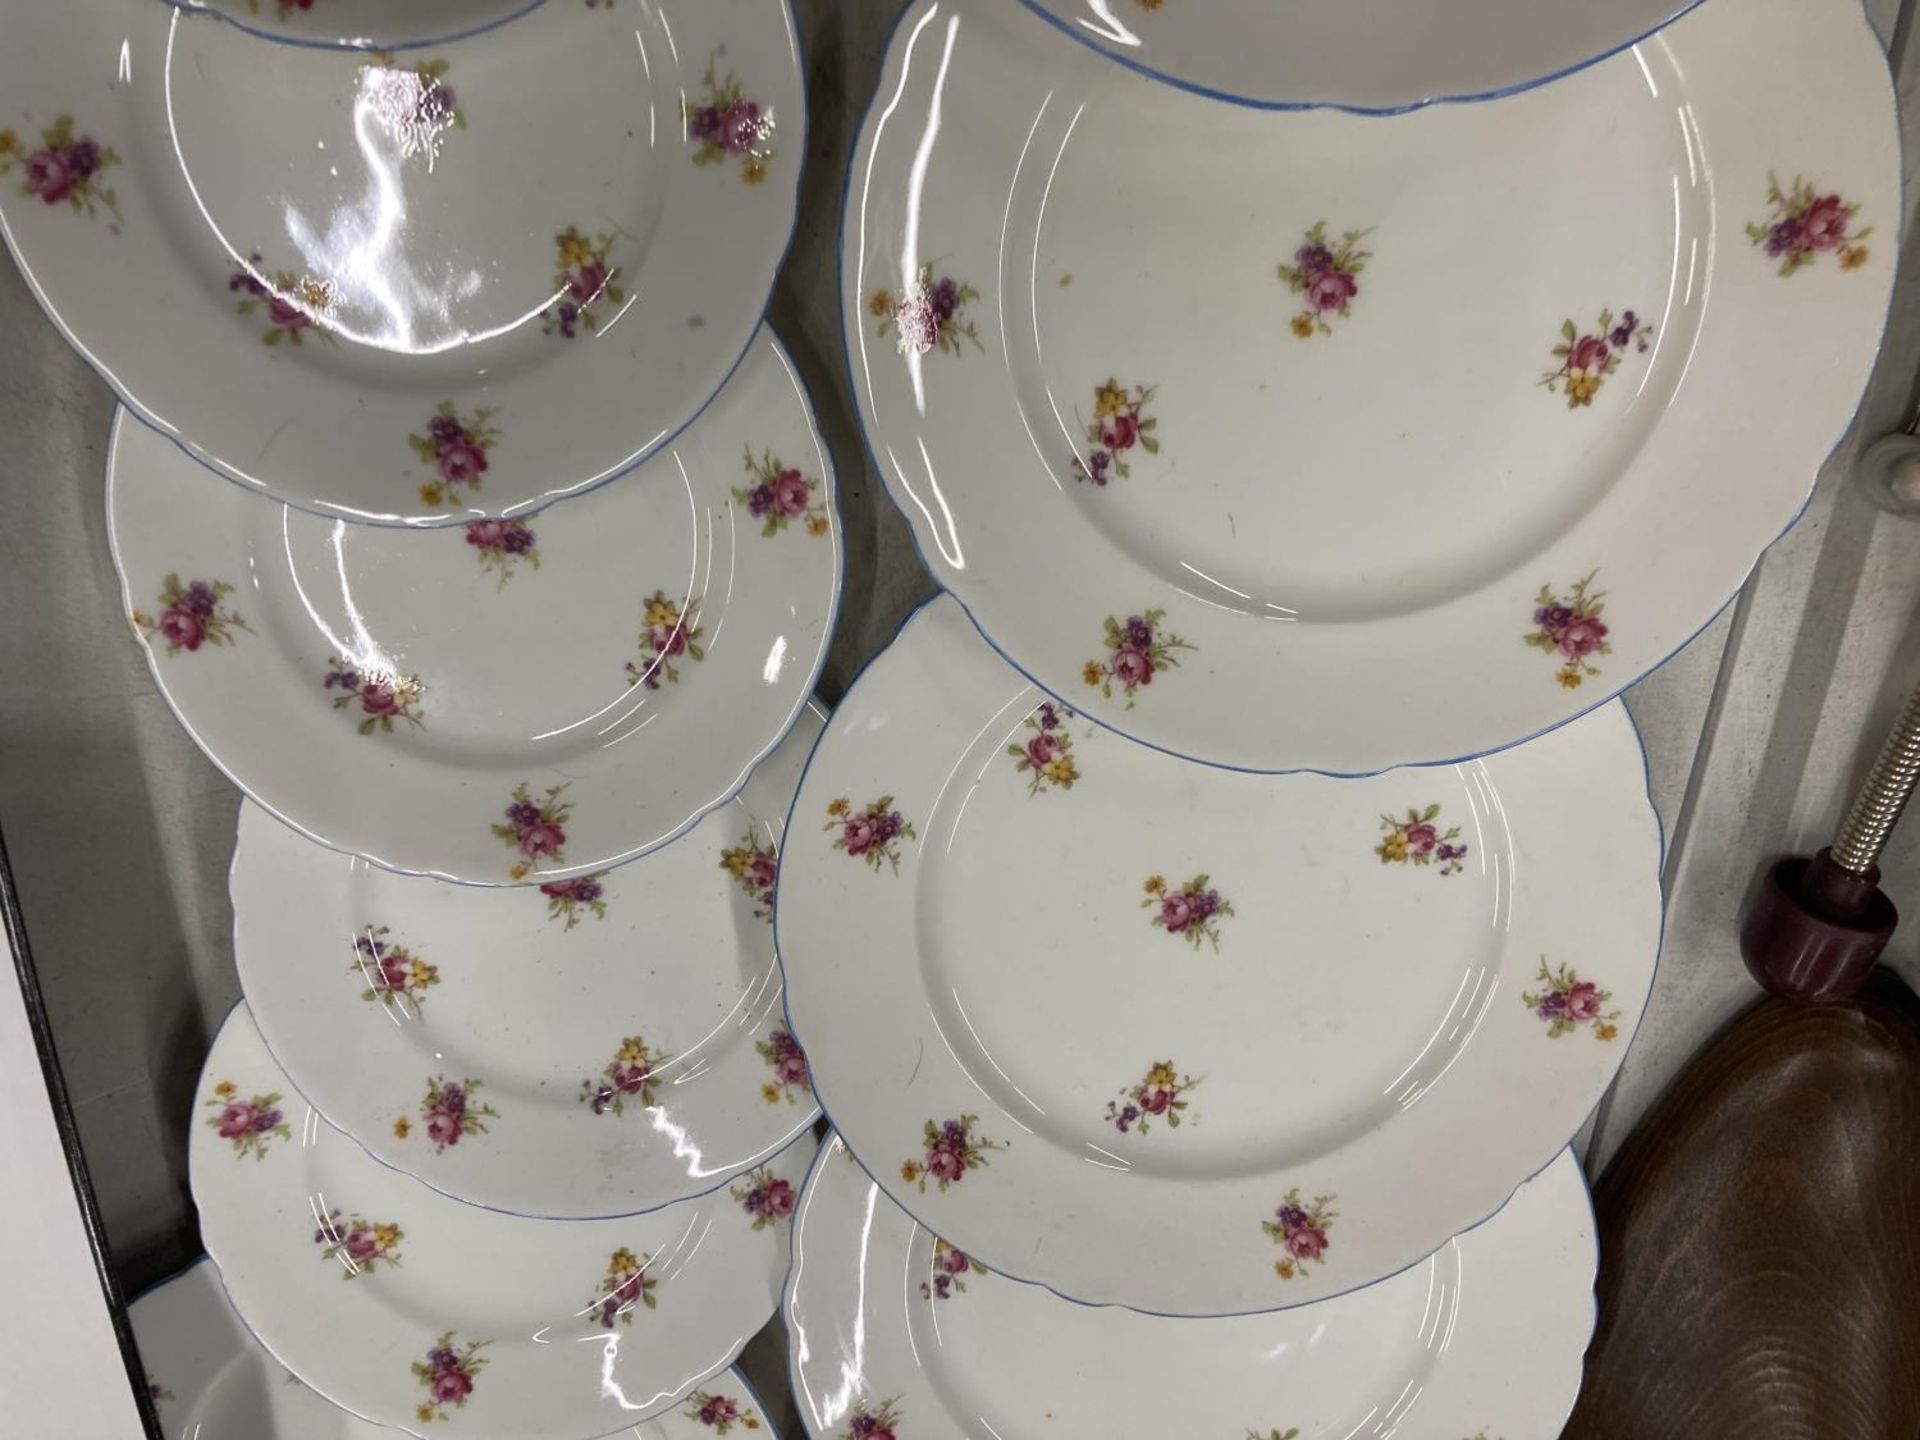 A QUANTITY OF SHELLEY CHINA PLATES WITH A DELICATE FLORAL PATTERN - 12 IN TOTAL - Image 2 of 3